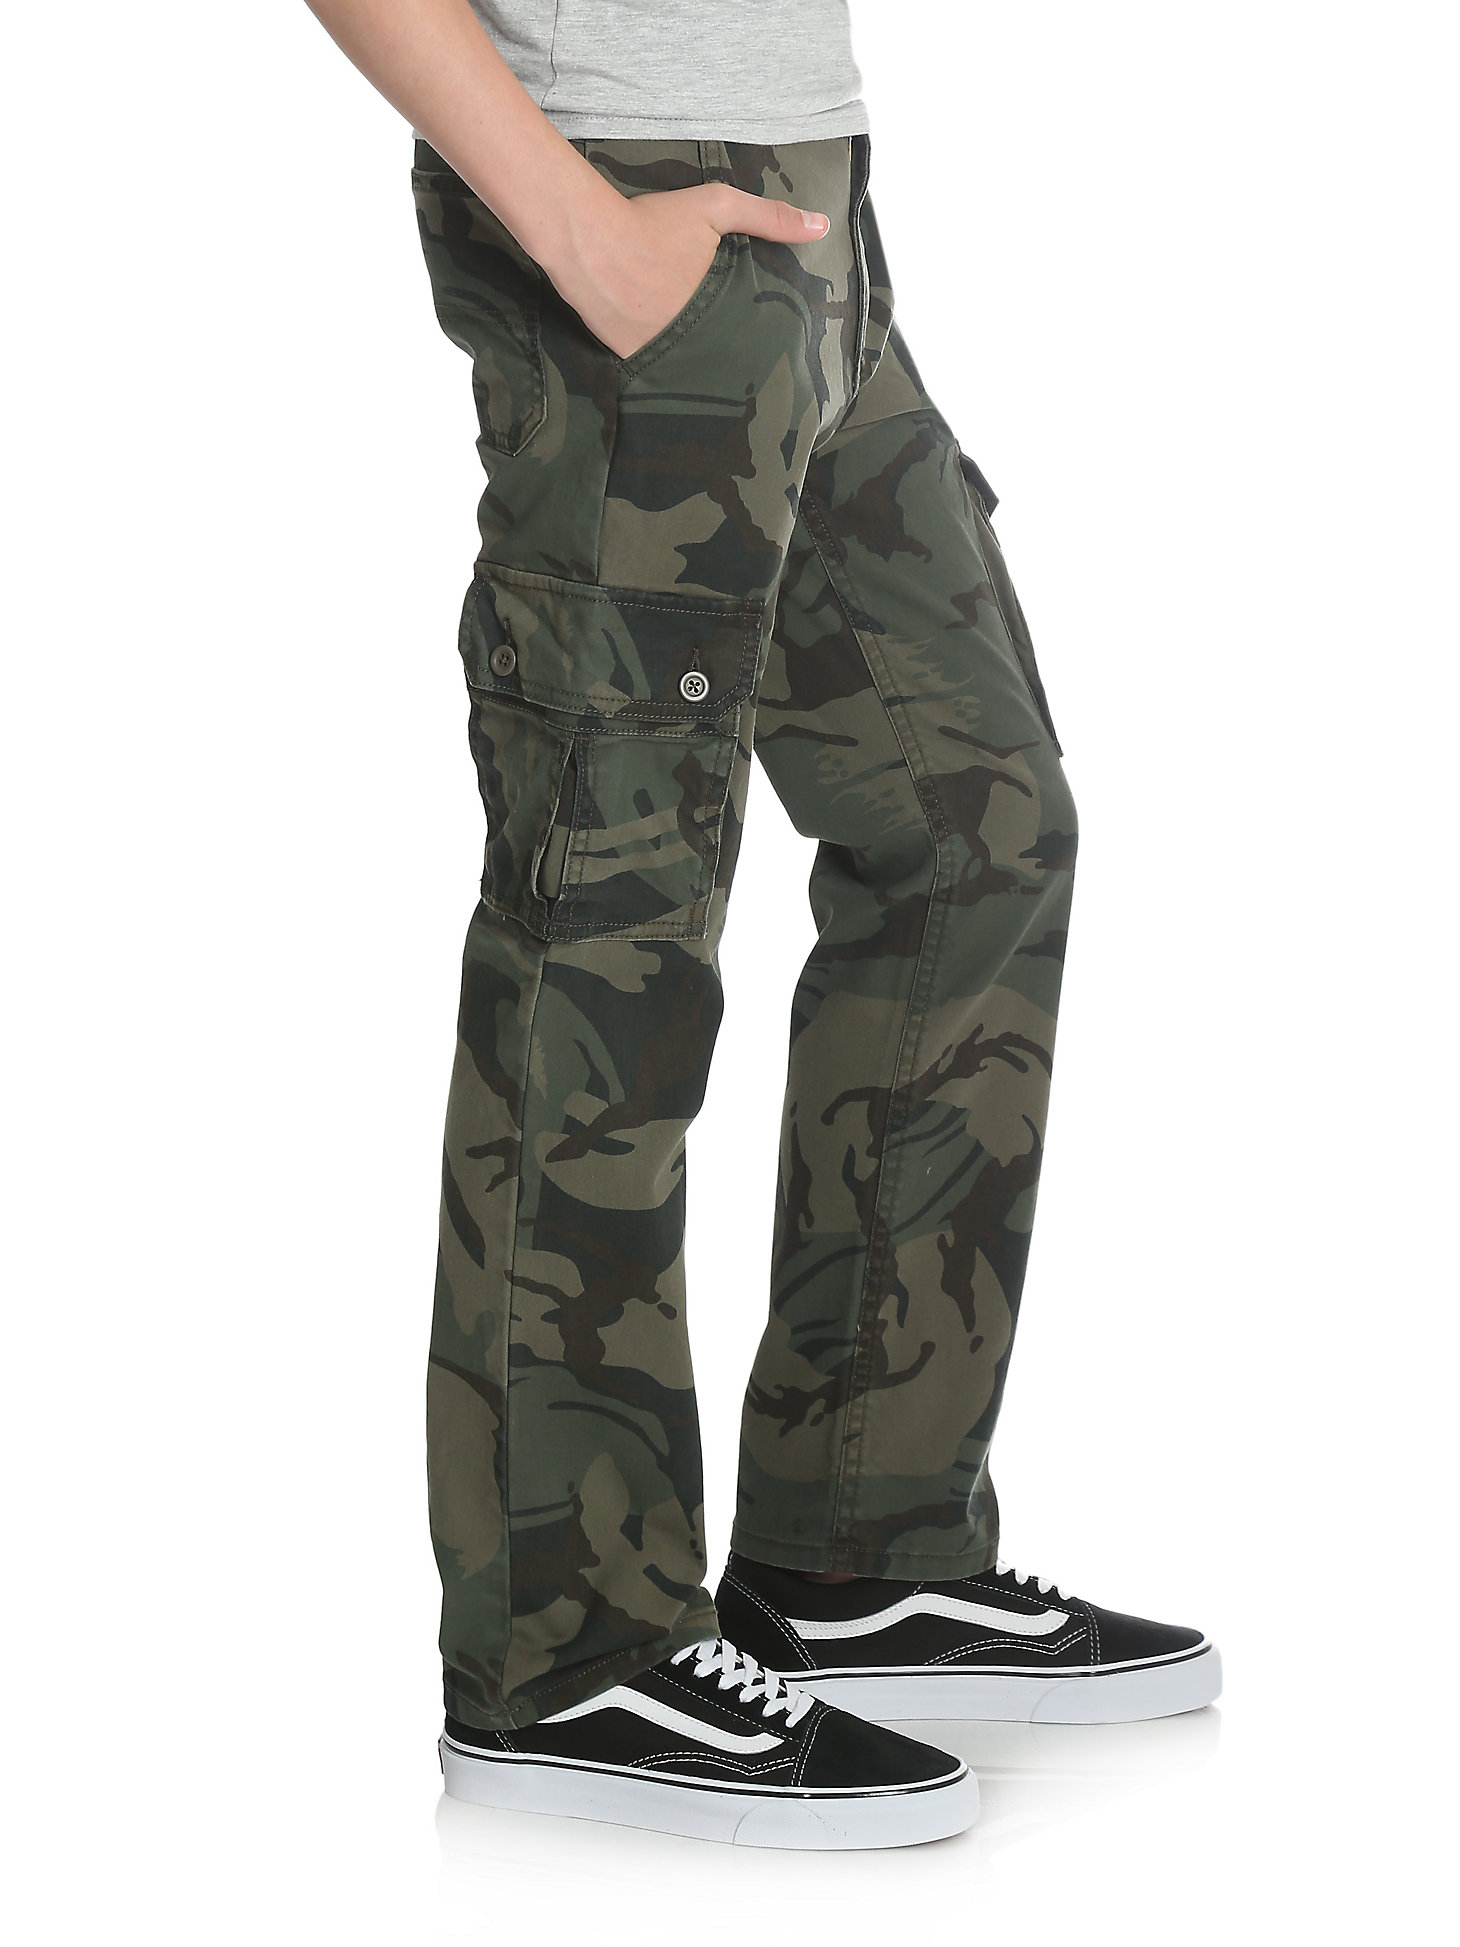 approx Womens Military Camouflage cargo trousers jeans Sizes 6 8 10 12 14 